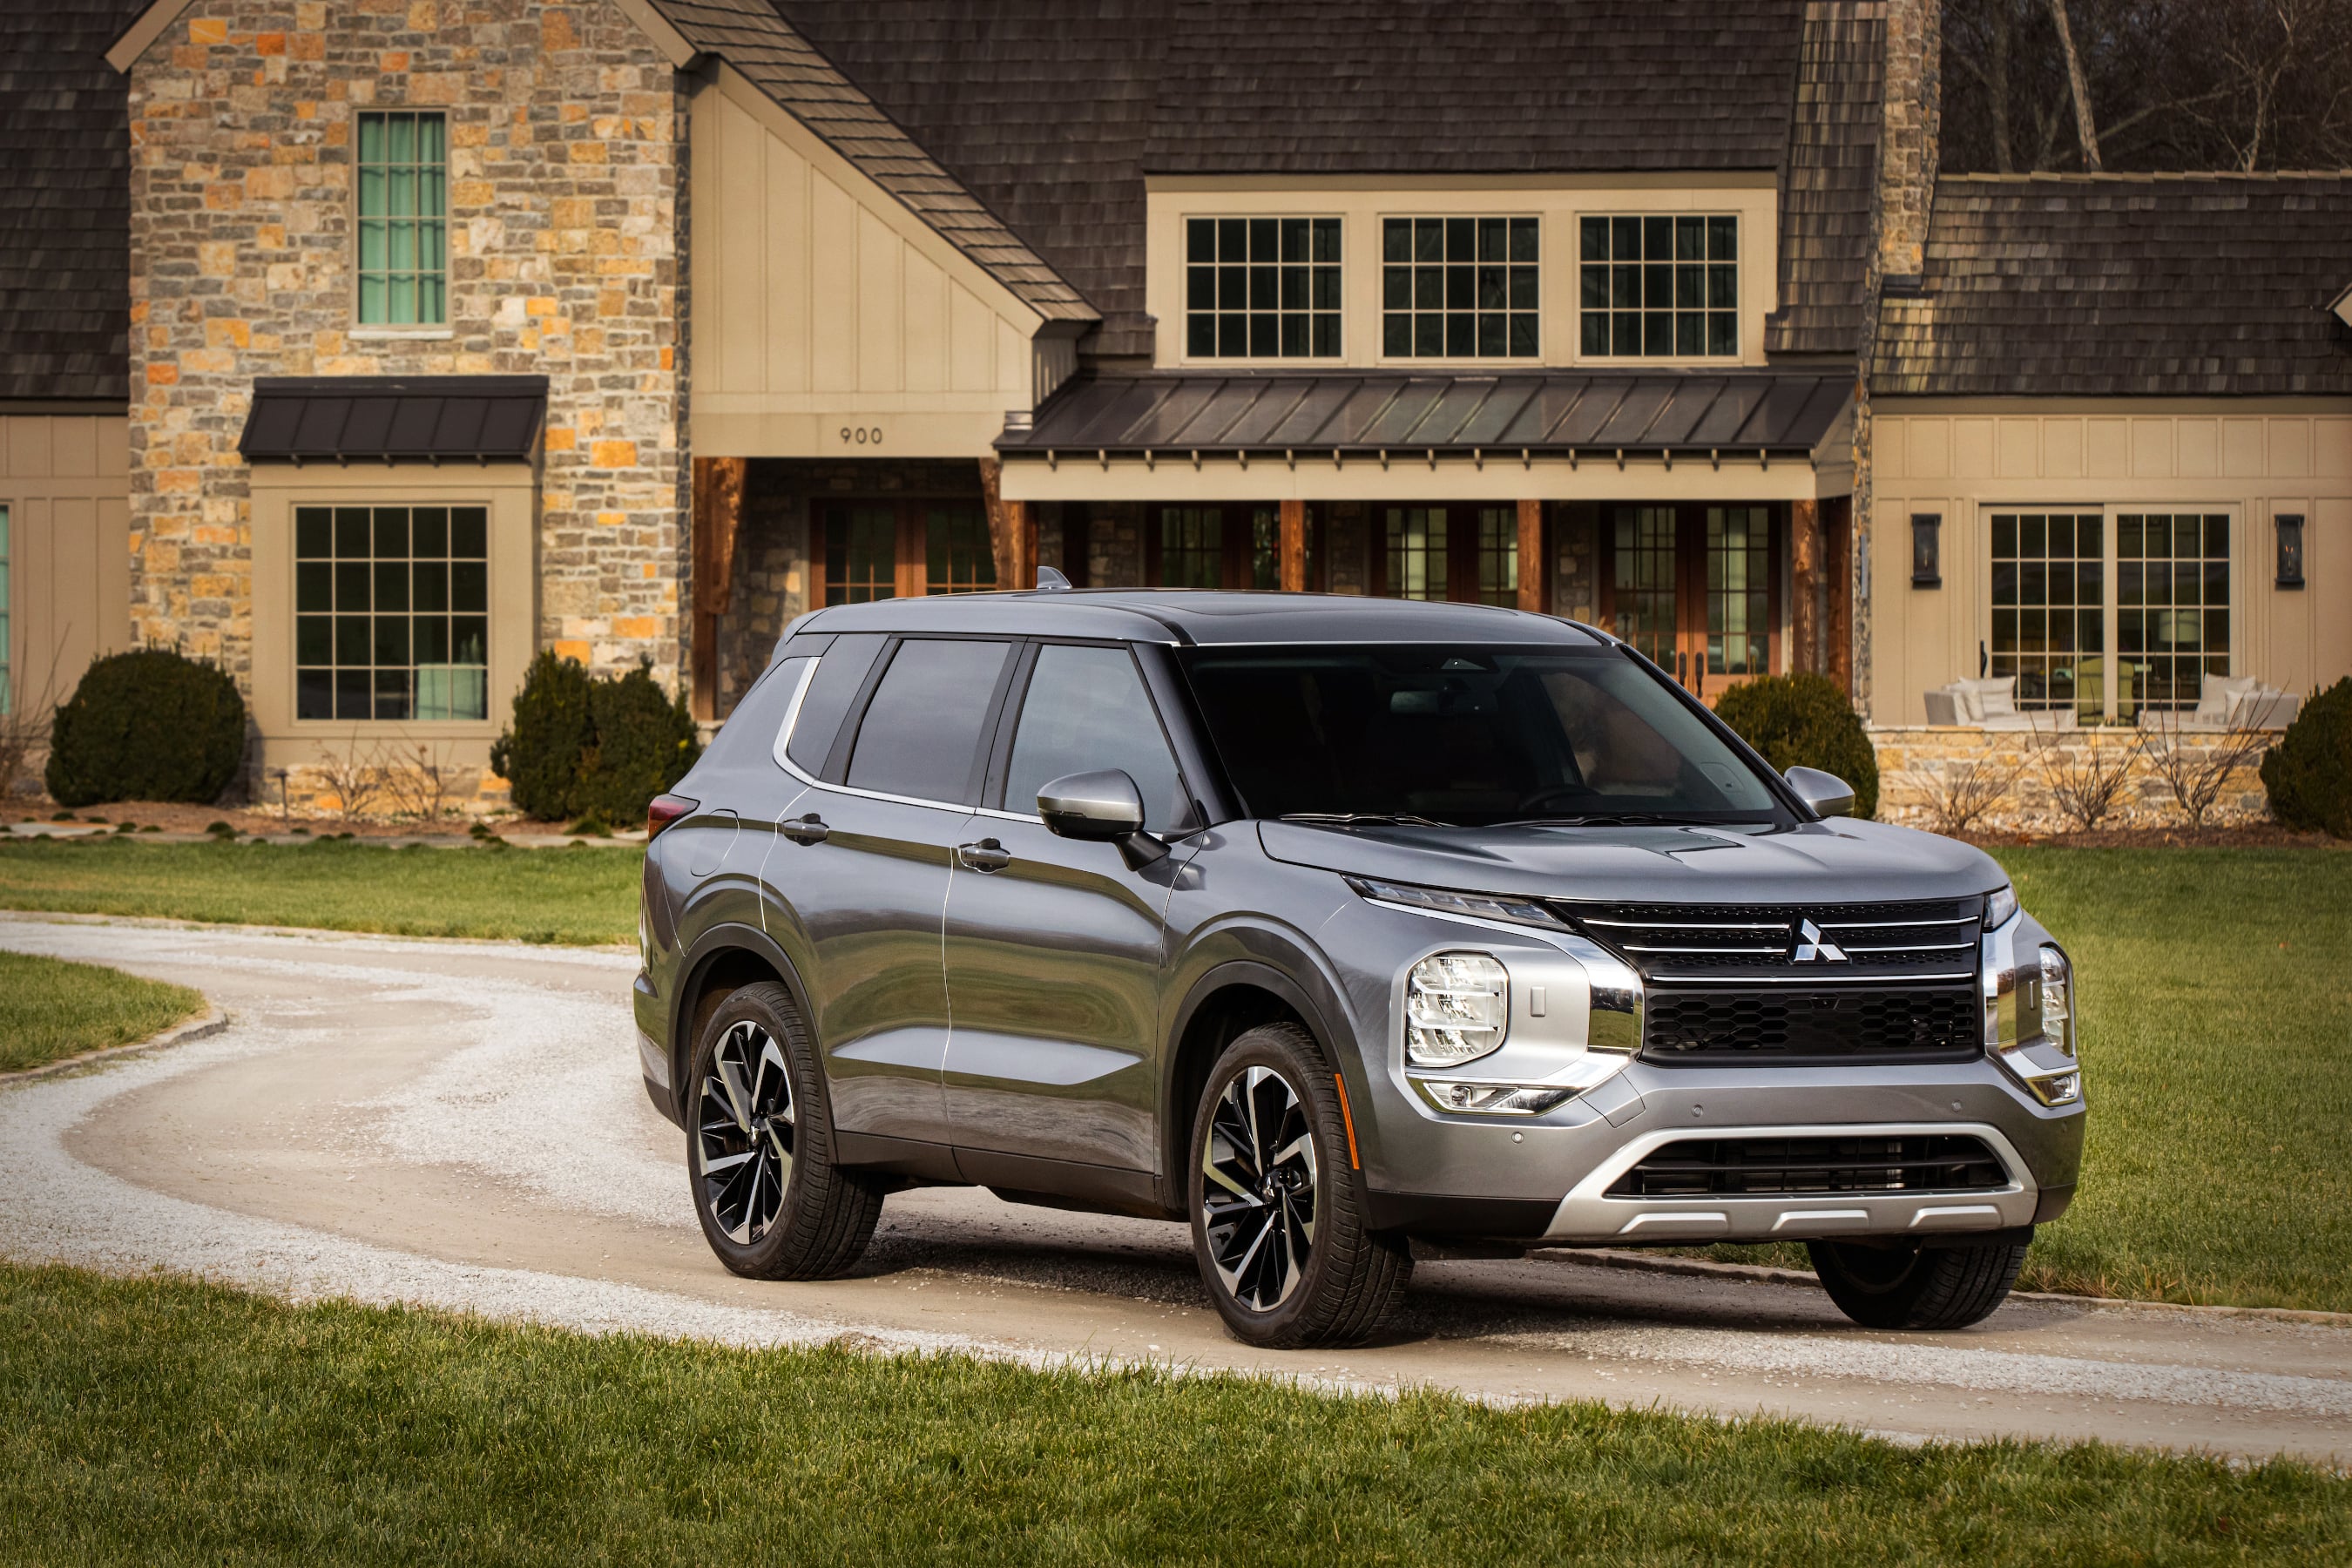 Following World Premiere Mitsubishi Motors Will Give Away All-New 2022 Outlander to One Lucky Winner